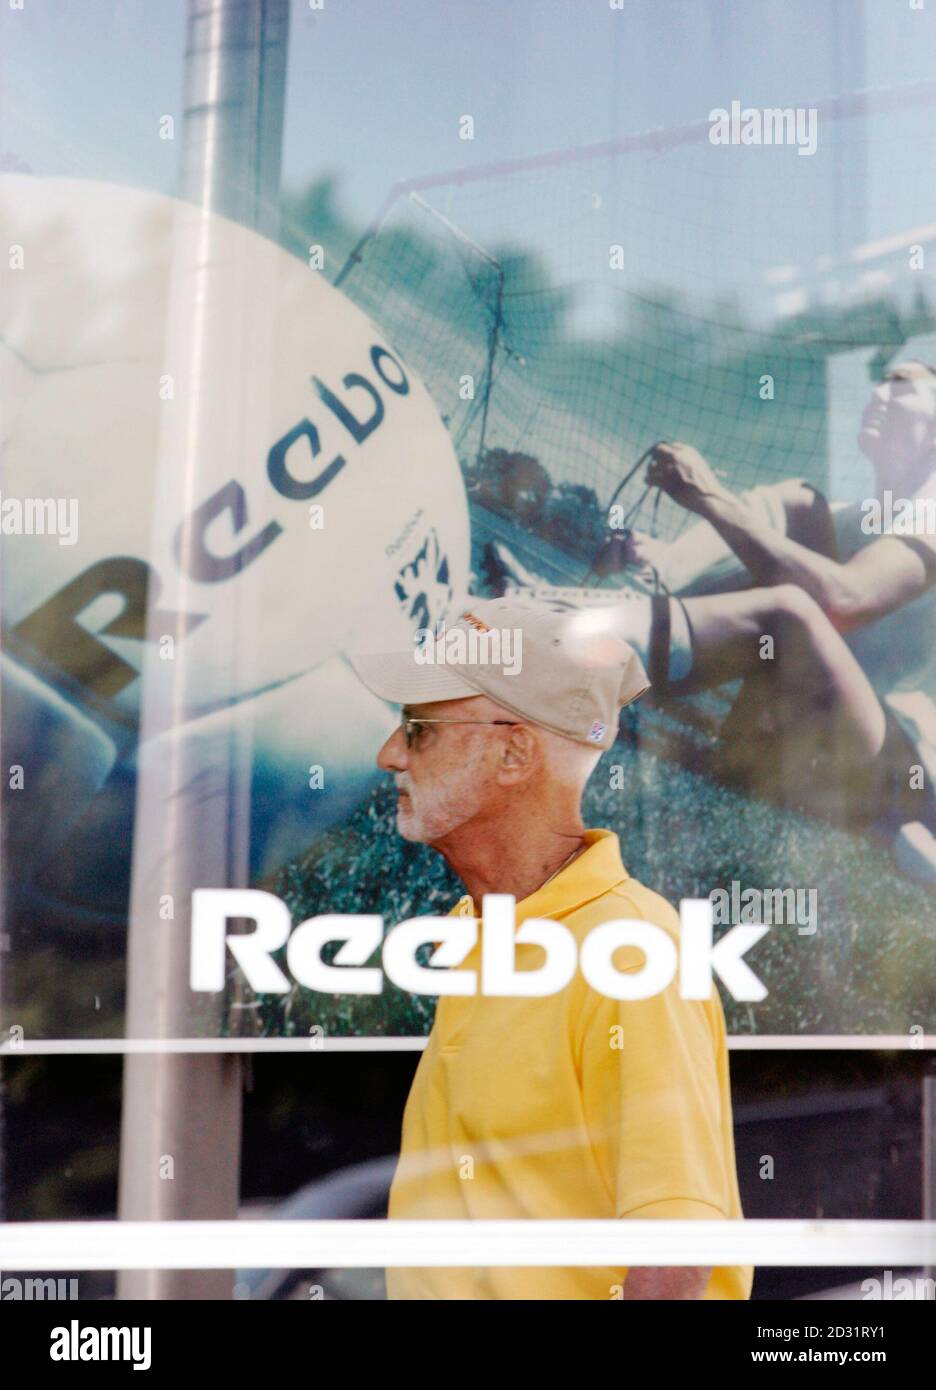 A customer enters the Reebok outlet store in Stoughton, Massachusetts  August 3, 2005. Germany's Adidas-Salomon is to buy rival sporting goods  firm Reebok in a deal worth 3.1 billion euros ($3.8 billion),